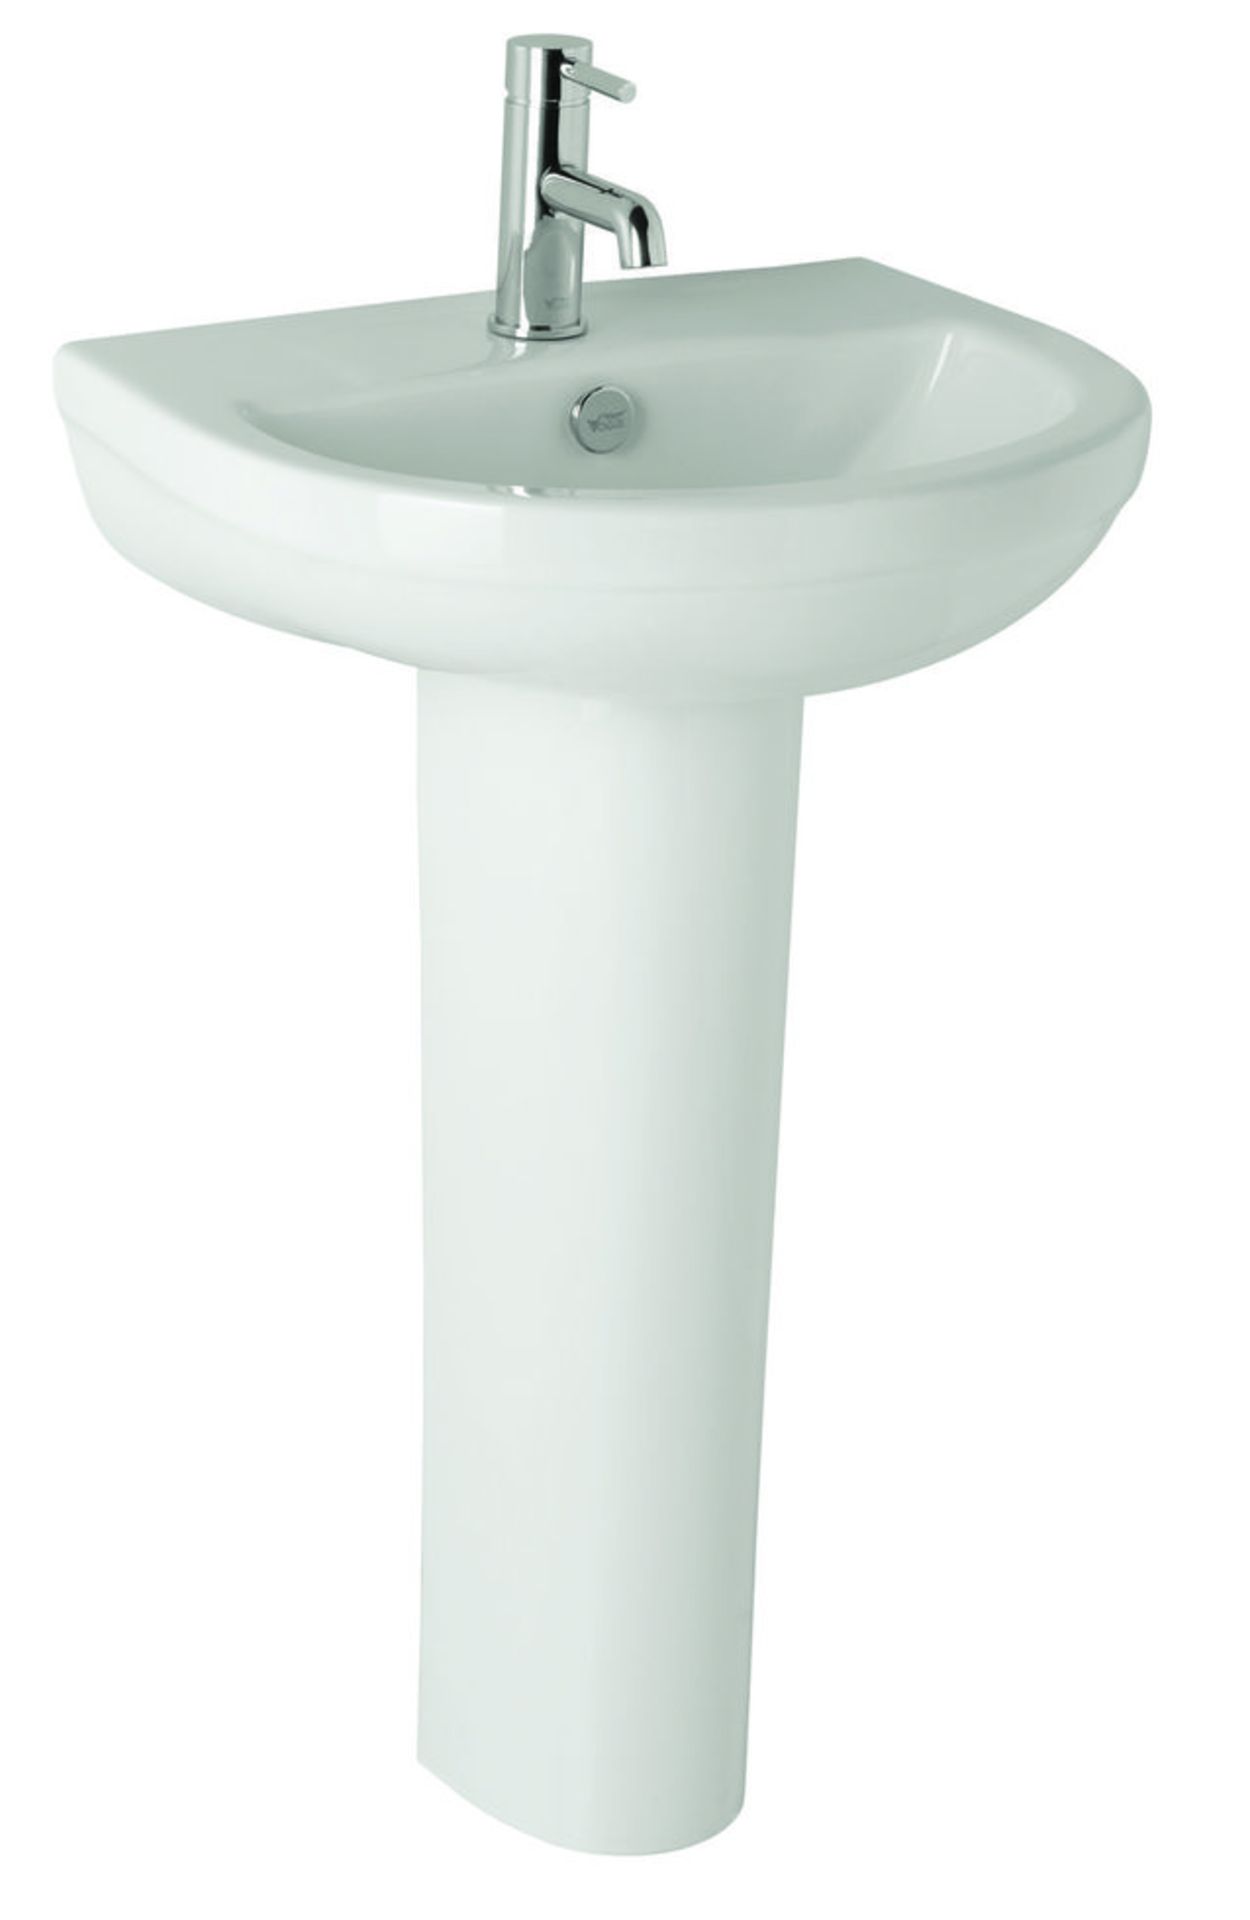 20 x Vogue Bathrooms KARIDI Single Tap Hole SINK BASINS With Full Pedestals - 550mm Width - Brand - Image 2 of 2